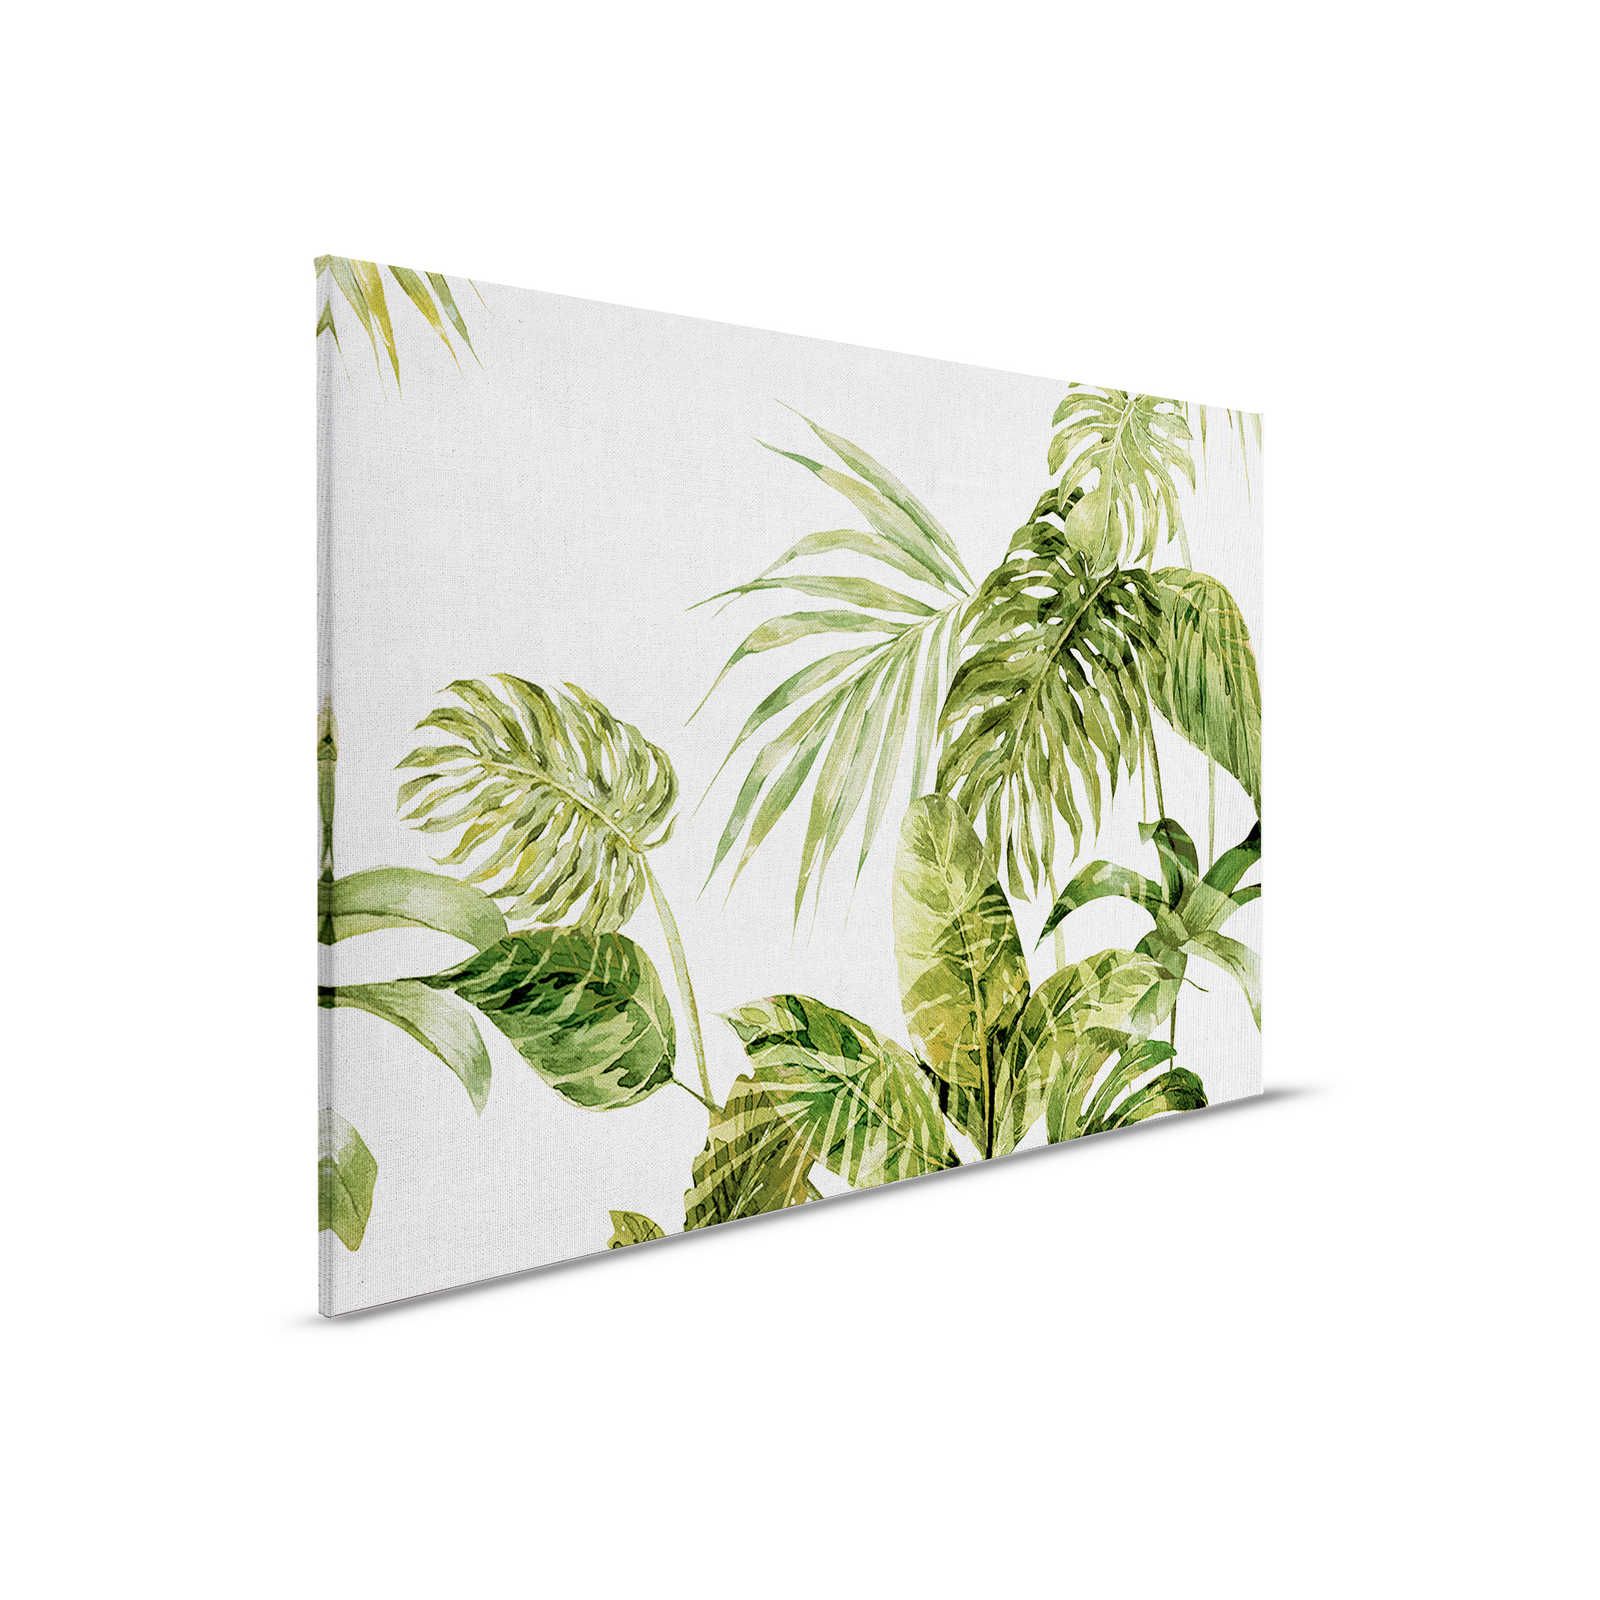 Tropical Canvas Painting Watercolour Monstera Leaves - 0.90 m x 0.60 m
